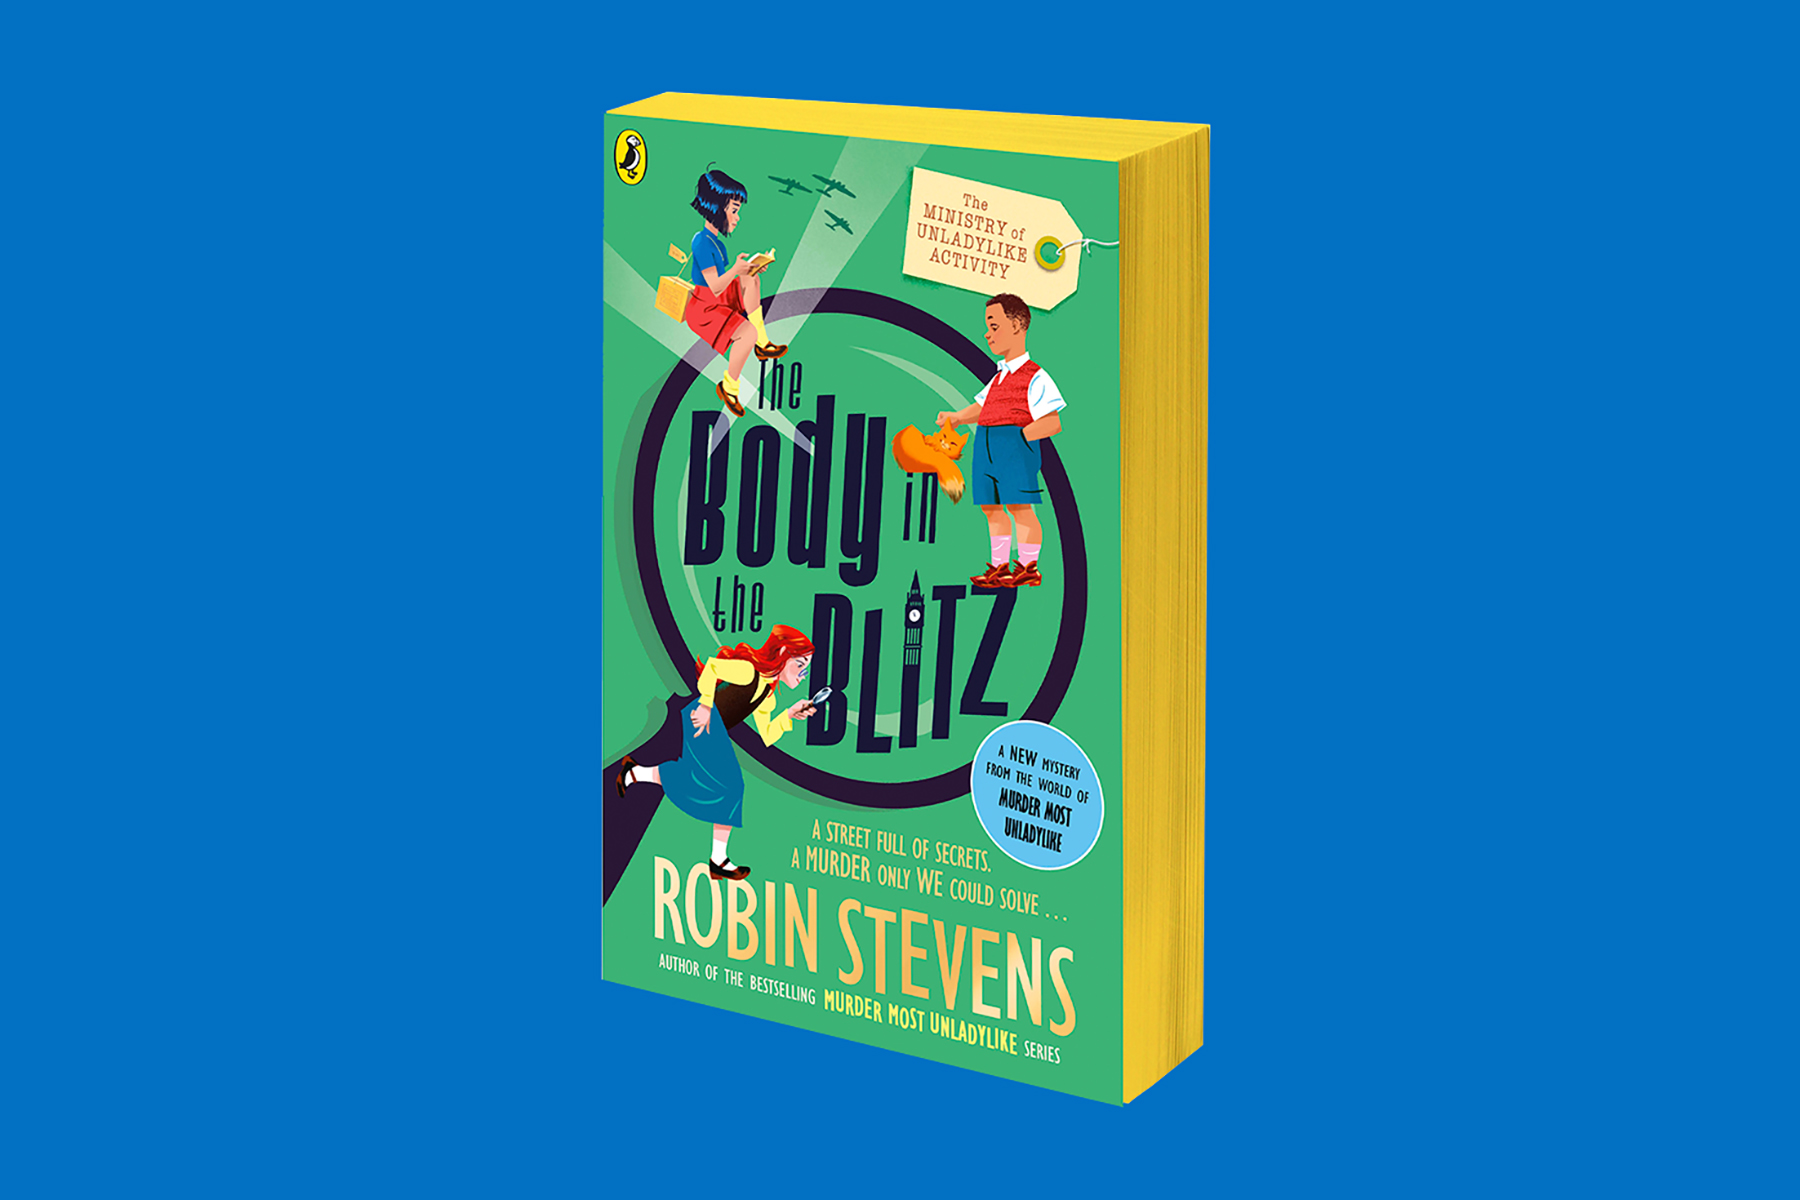 An image of the book cover of Robin Stevens' new book The Body in the Blitz on a plain blue background.